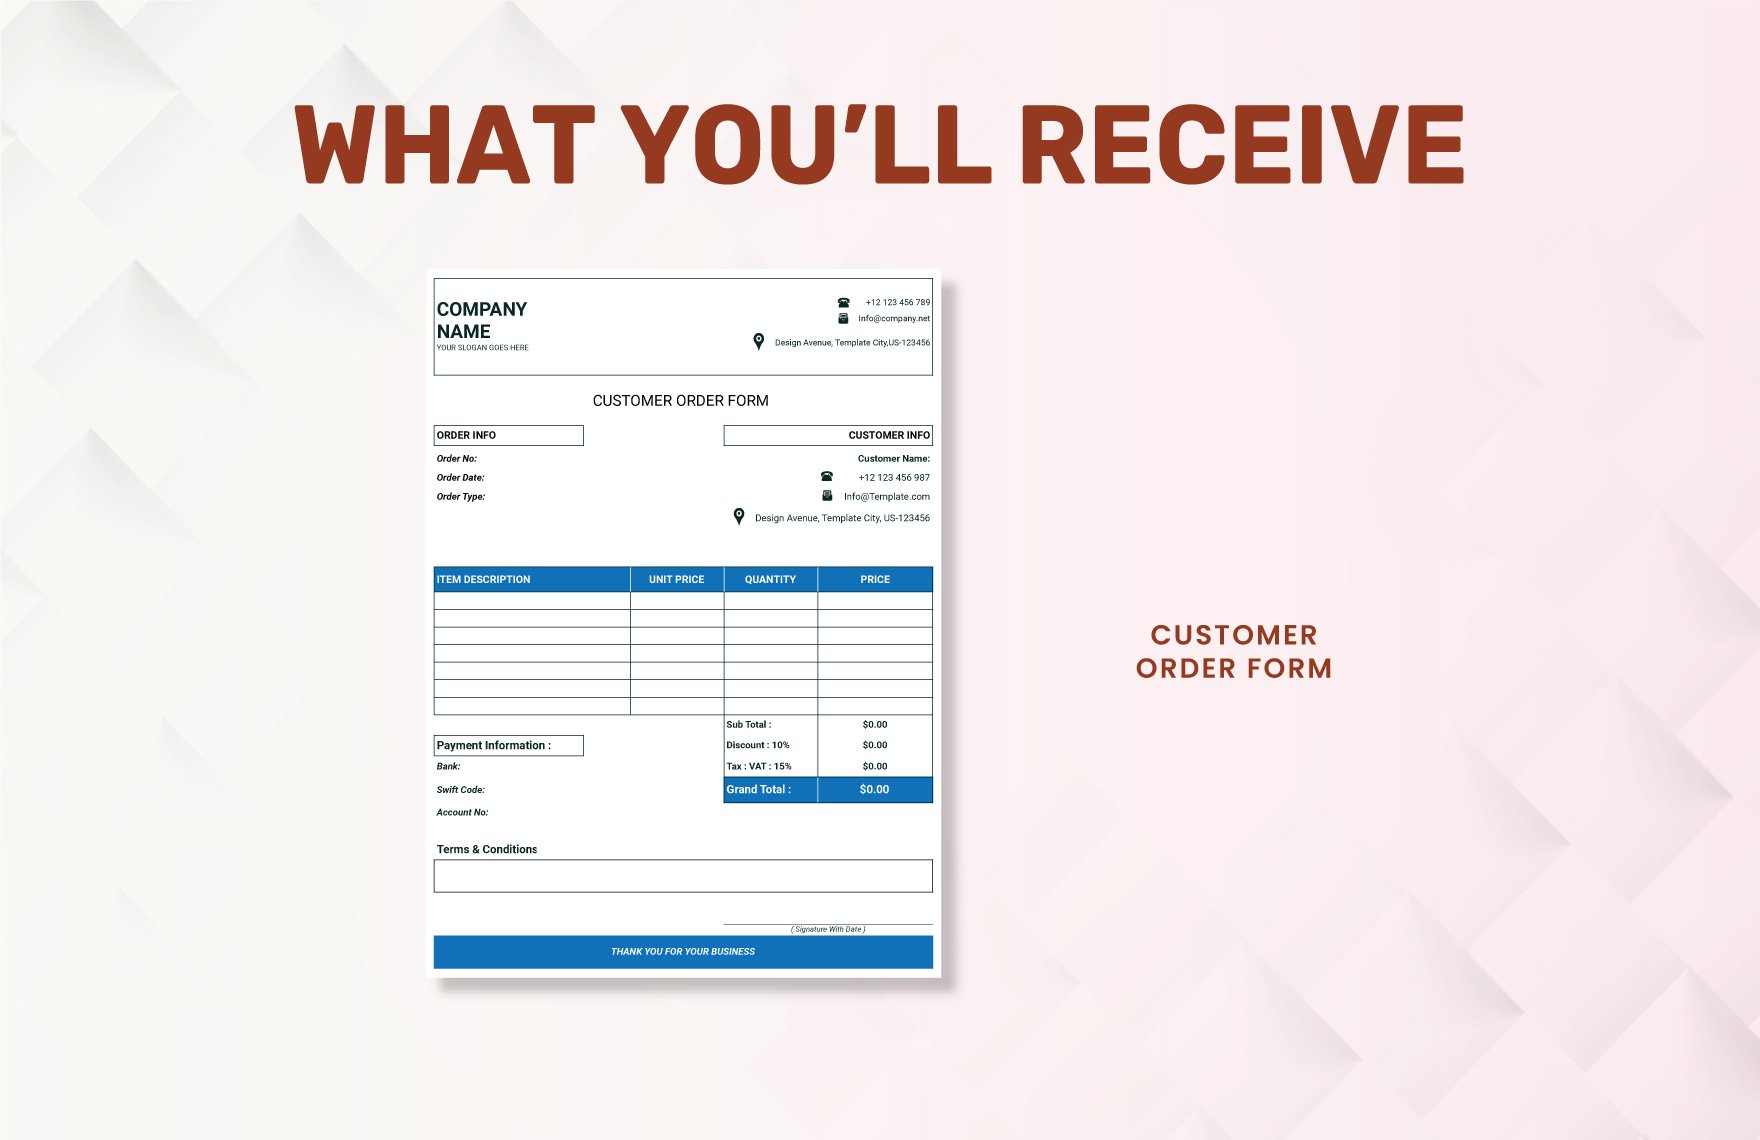 Customer Order Form Template